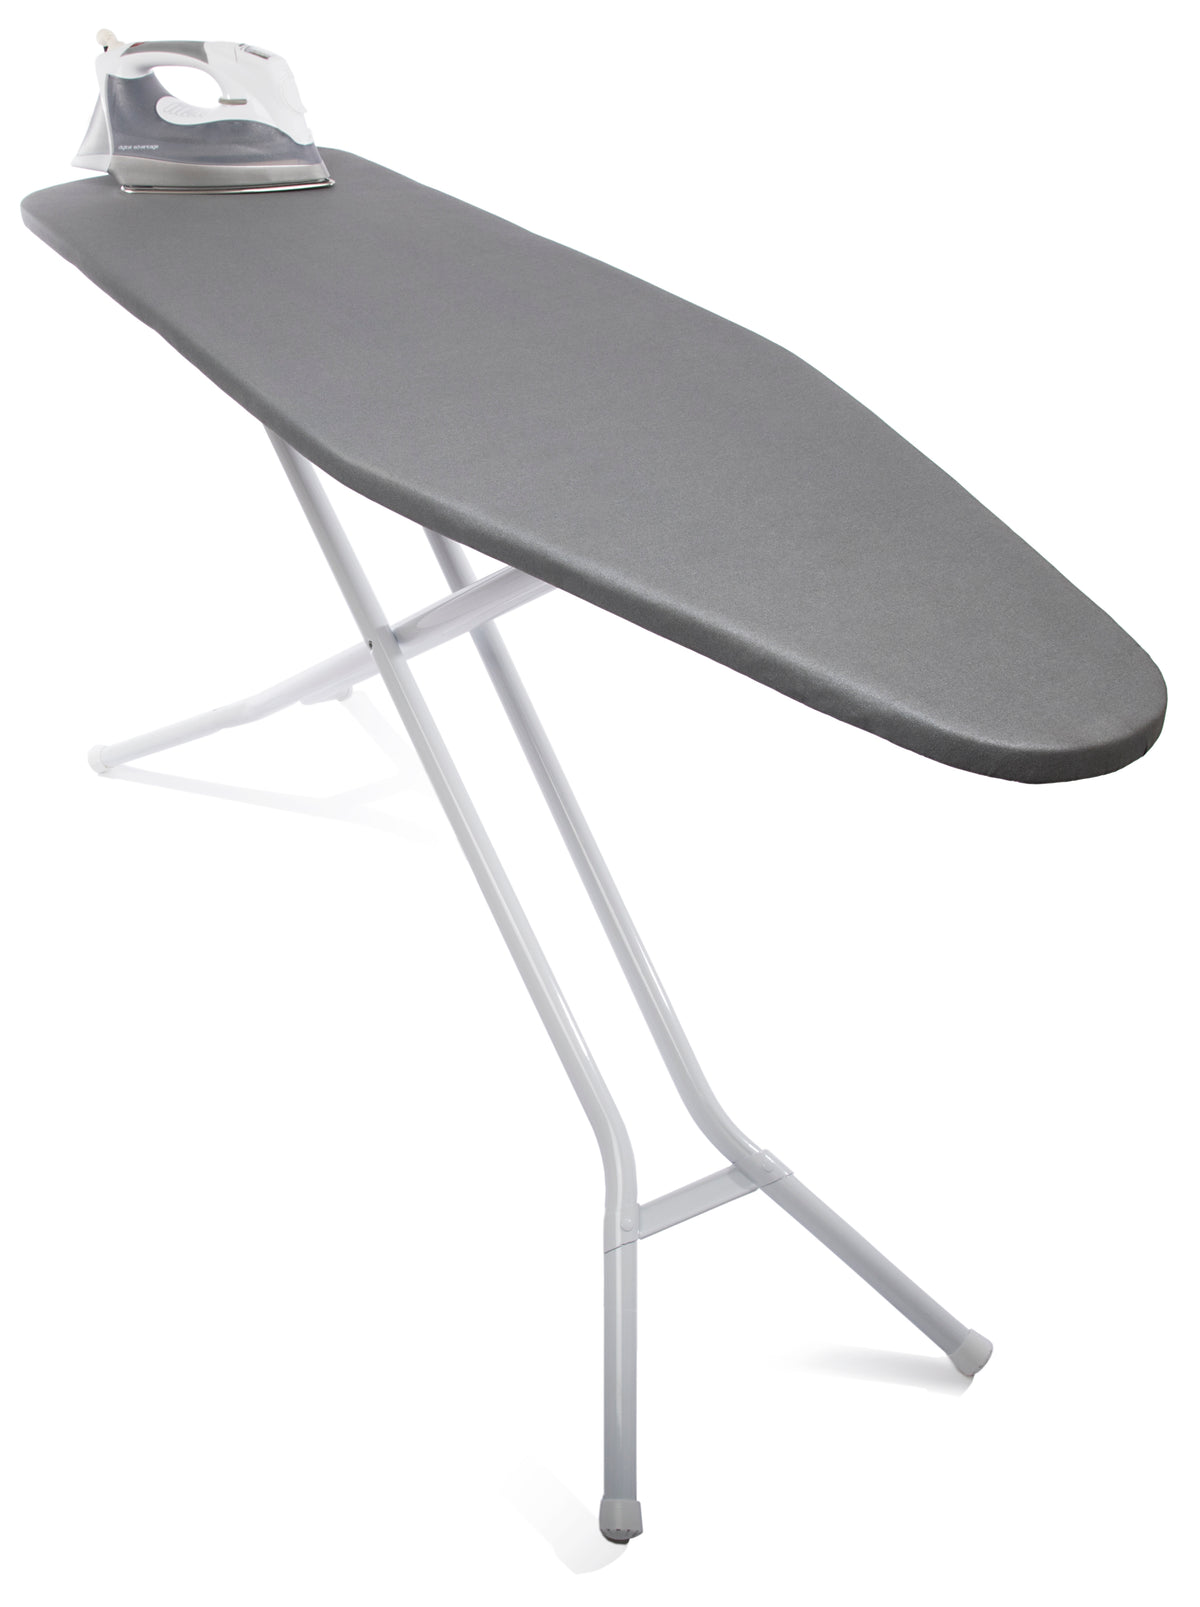 TIVIT Ironing Board Cover 15 x 54 Pro Grip Pad Covers w/3 Fastener Straps &amp; Pull Bungee Cord - Durable Scorch &amp; Stain Resistant Padded Layers, Heat Reflective AlumiTek PRO Top Coat - Made in Italy